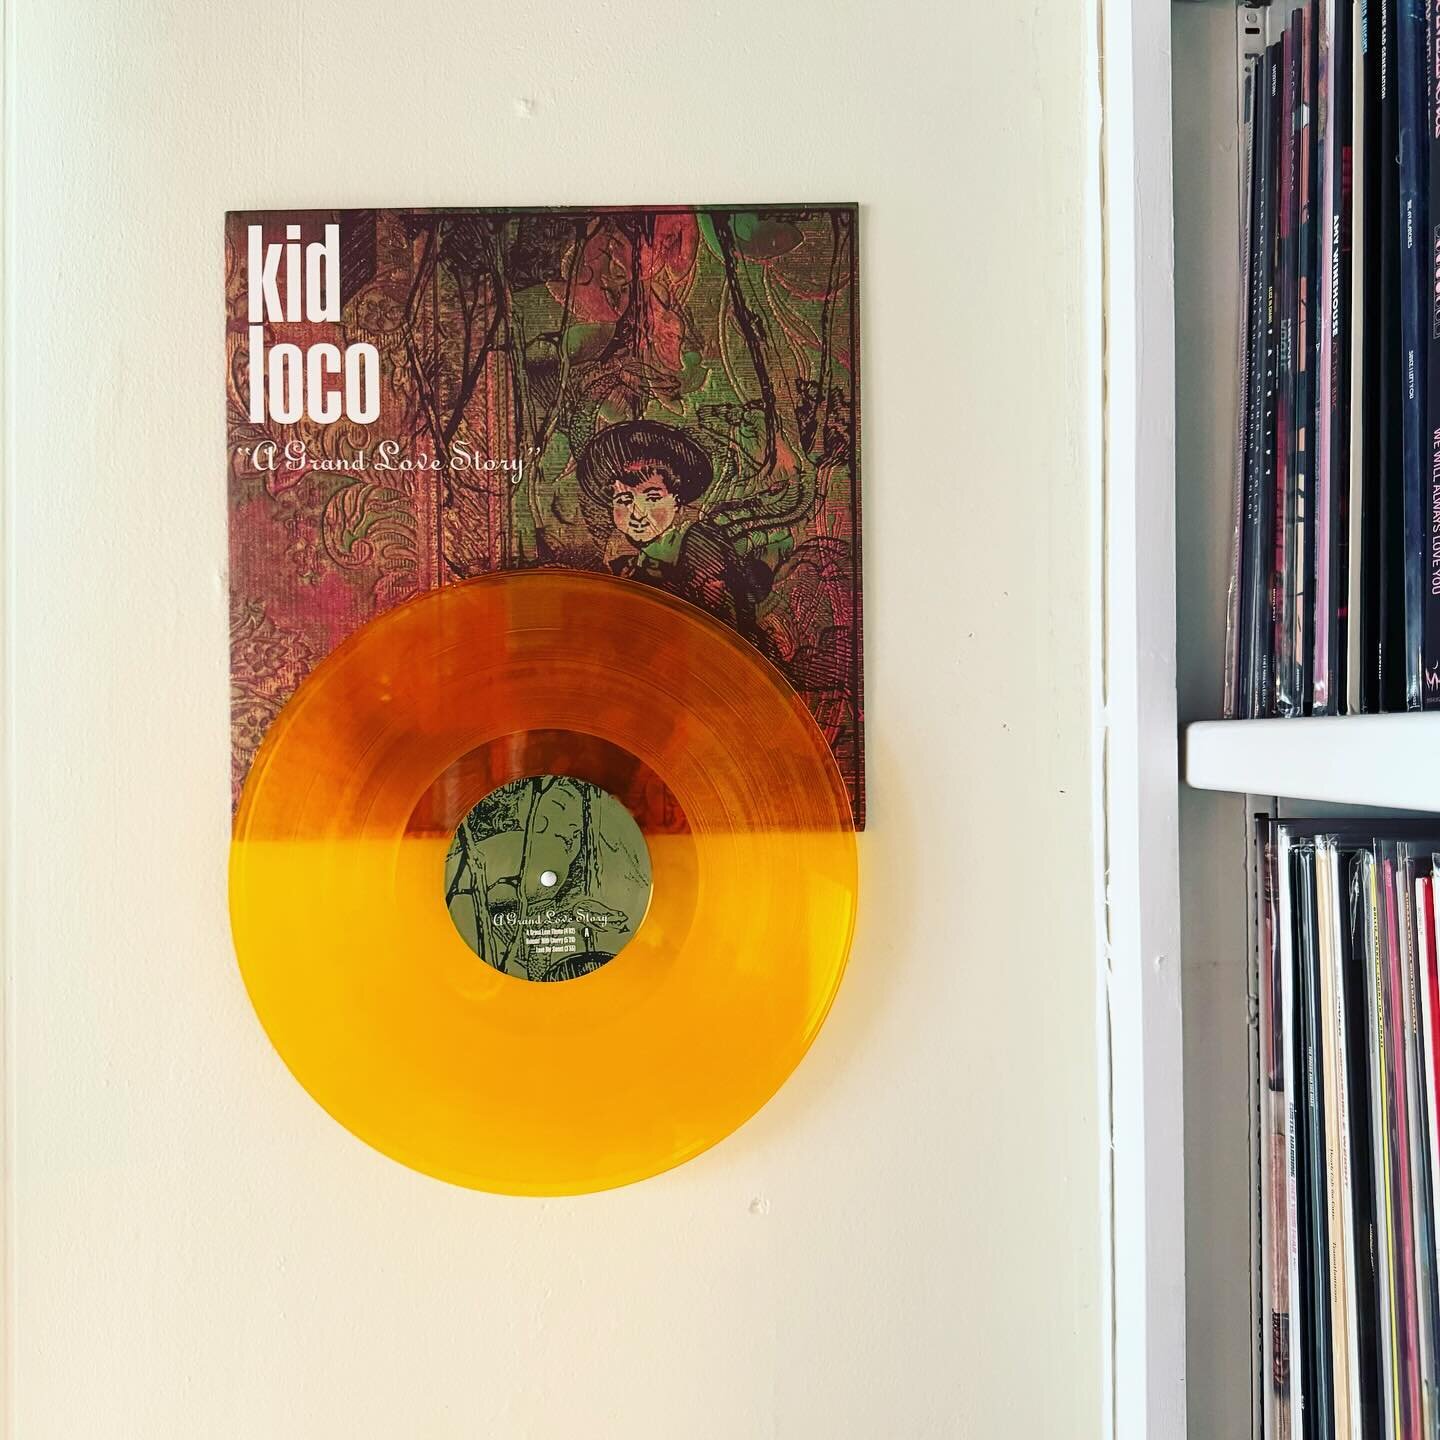 Kid Loco &ndash; A Grand Love Story [1997] &ndash; Starting the weekend with one of the GOATS @kidloco_music 
.
#triphop #recordprops #vinylrecords #recordcollection #vinylcollection #turntable #nowspinning #nowplaying